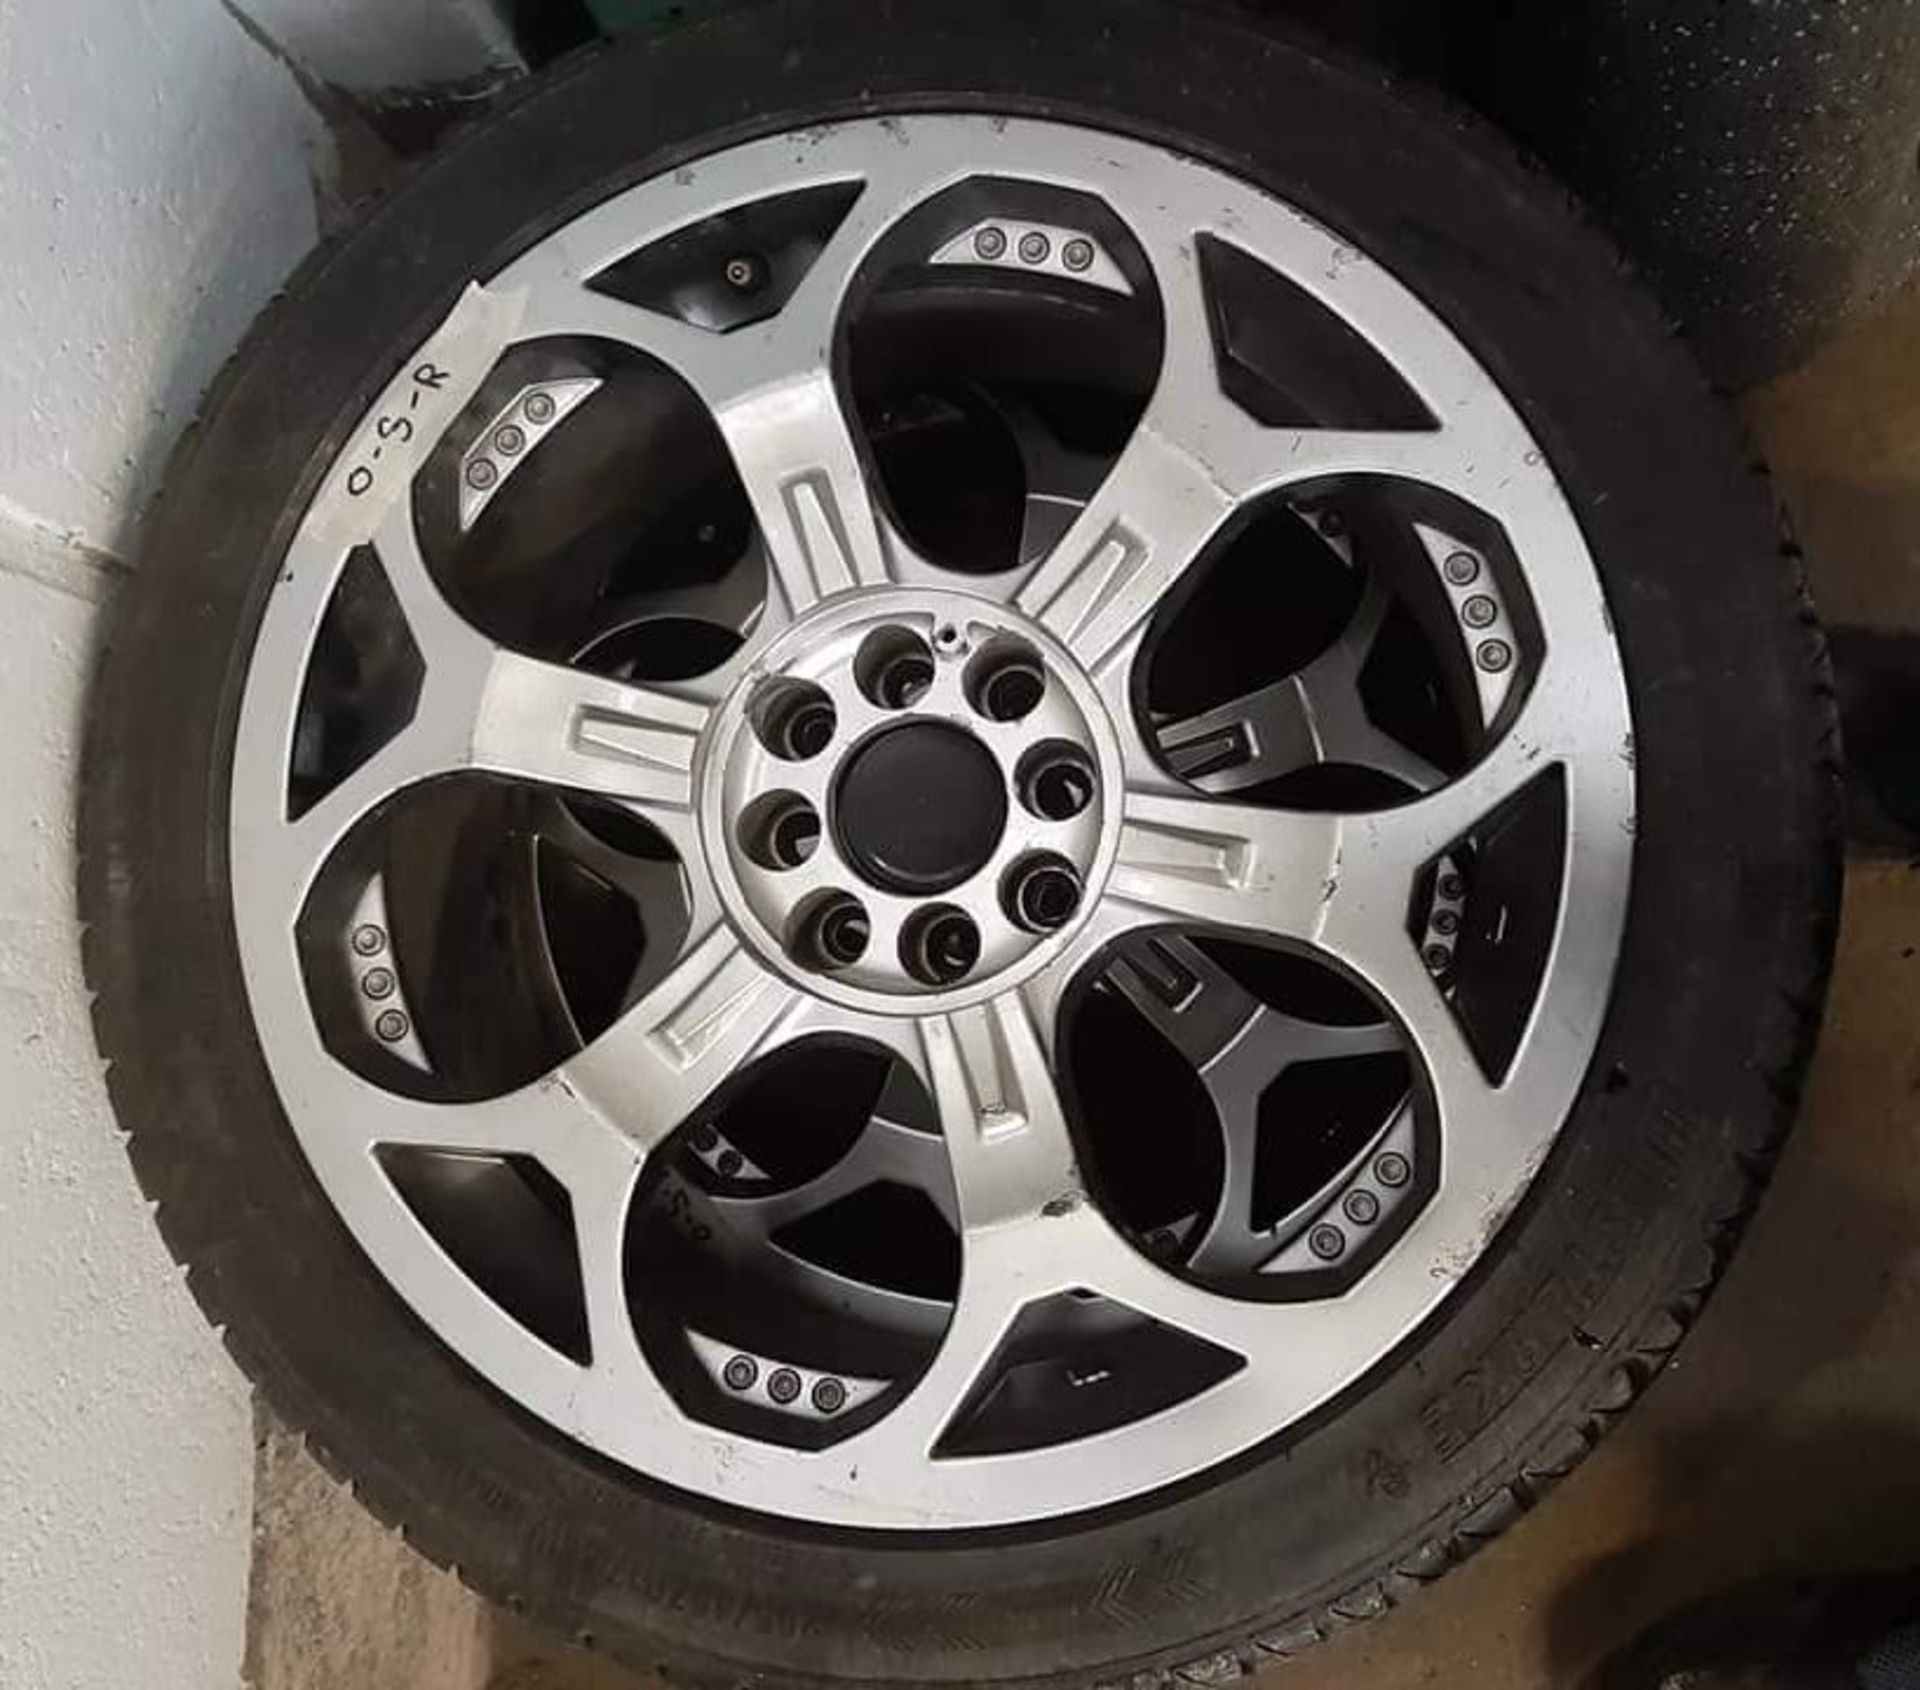 Set of 4 Multi Fitment 4 Stud 17" x 7.0" Alloy Wheels with 205/45ZR17 Tyres - CL444 - No VAT on